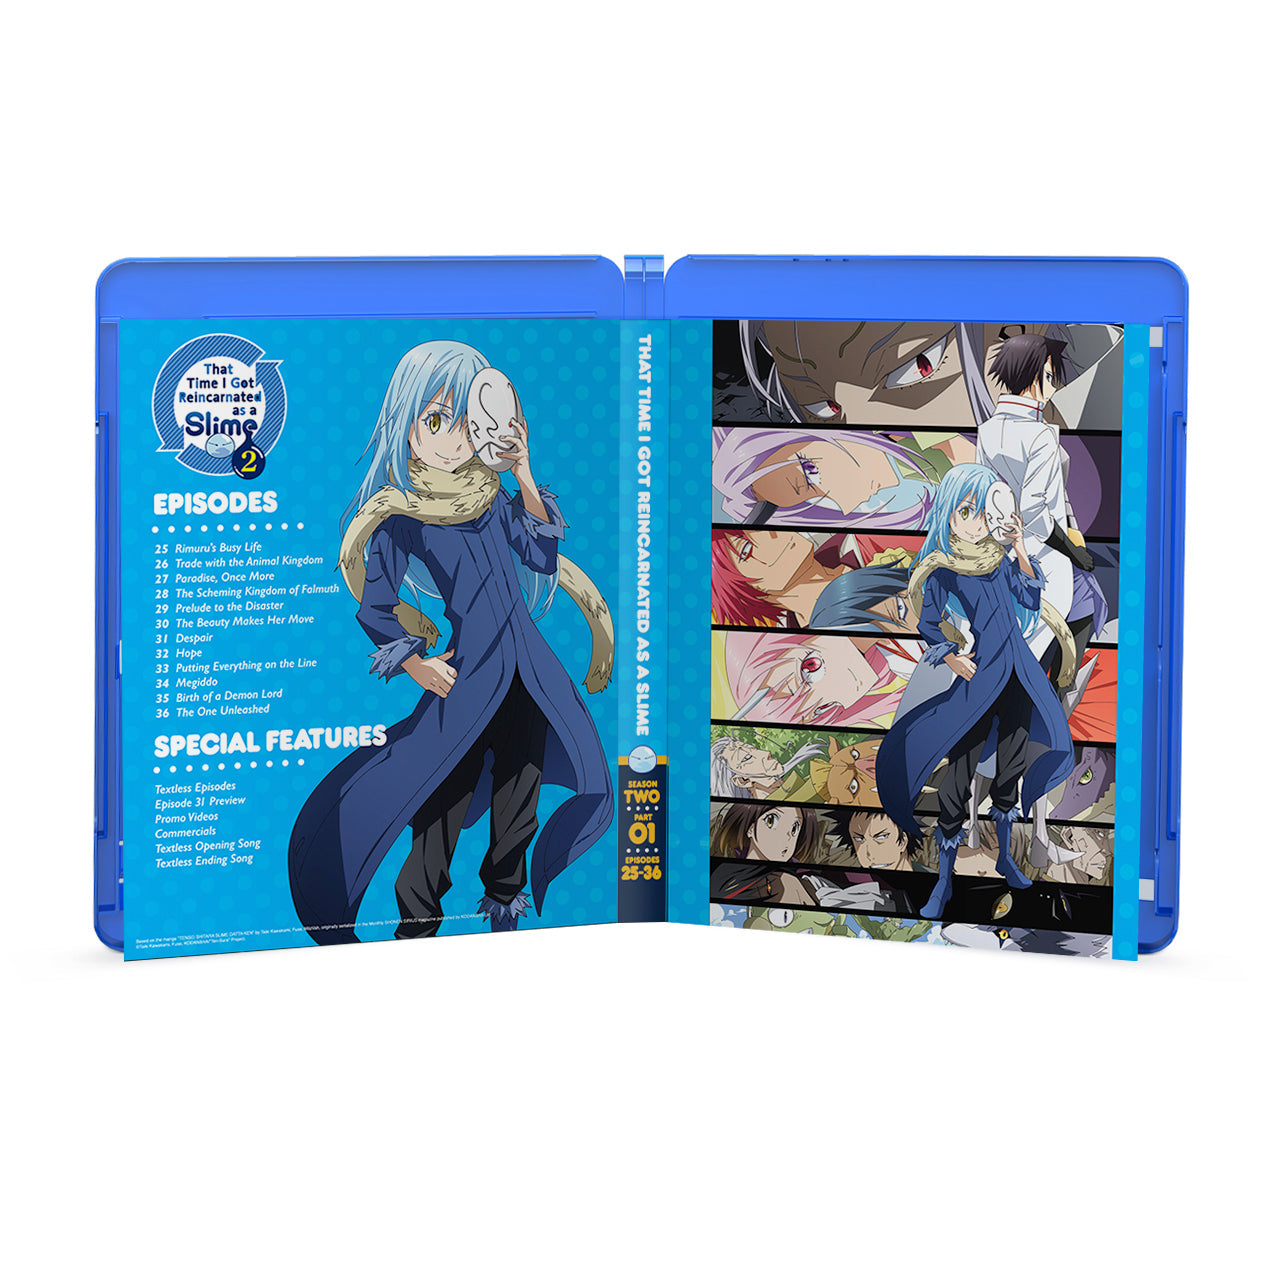 That Time I Got Reincarnated as a Slime - Season 2 Part 1 - Blu-ray + DVD image count 3